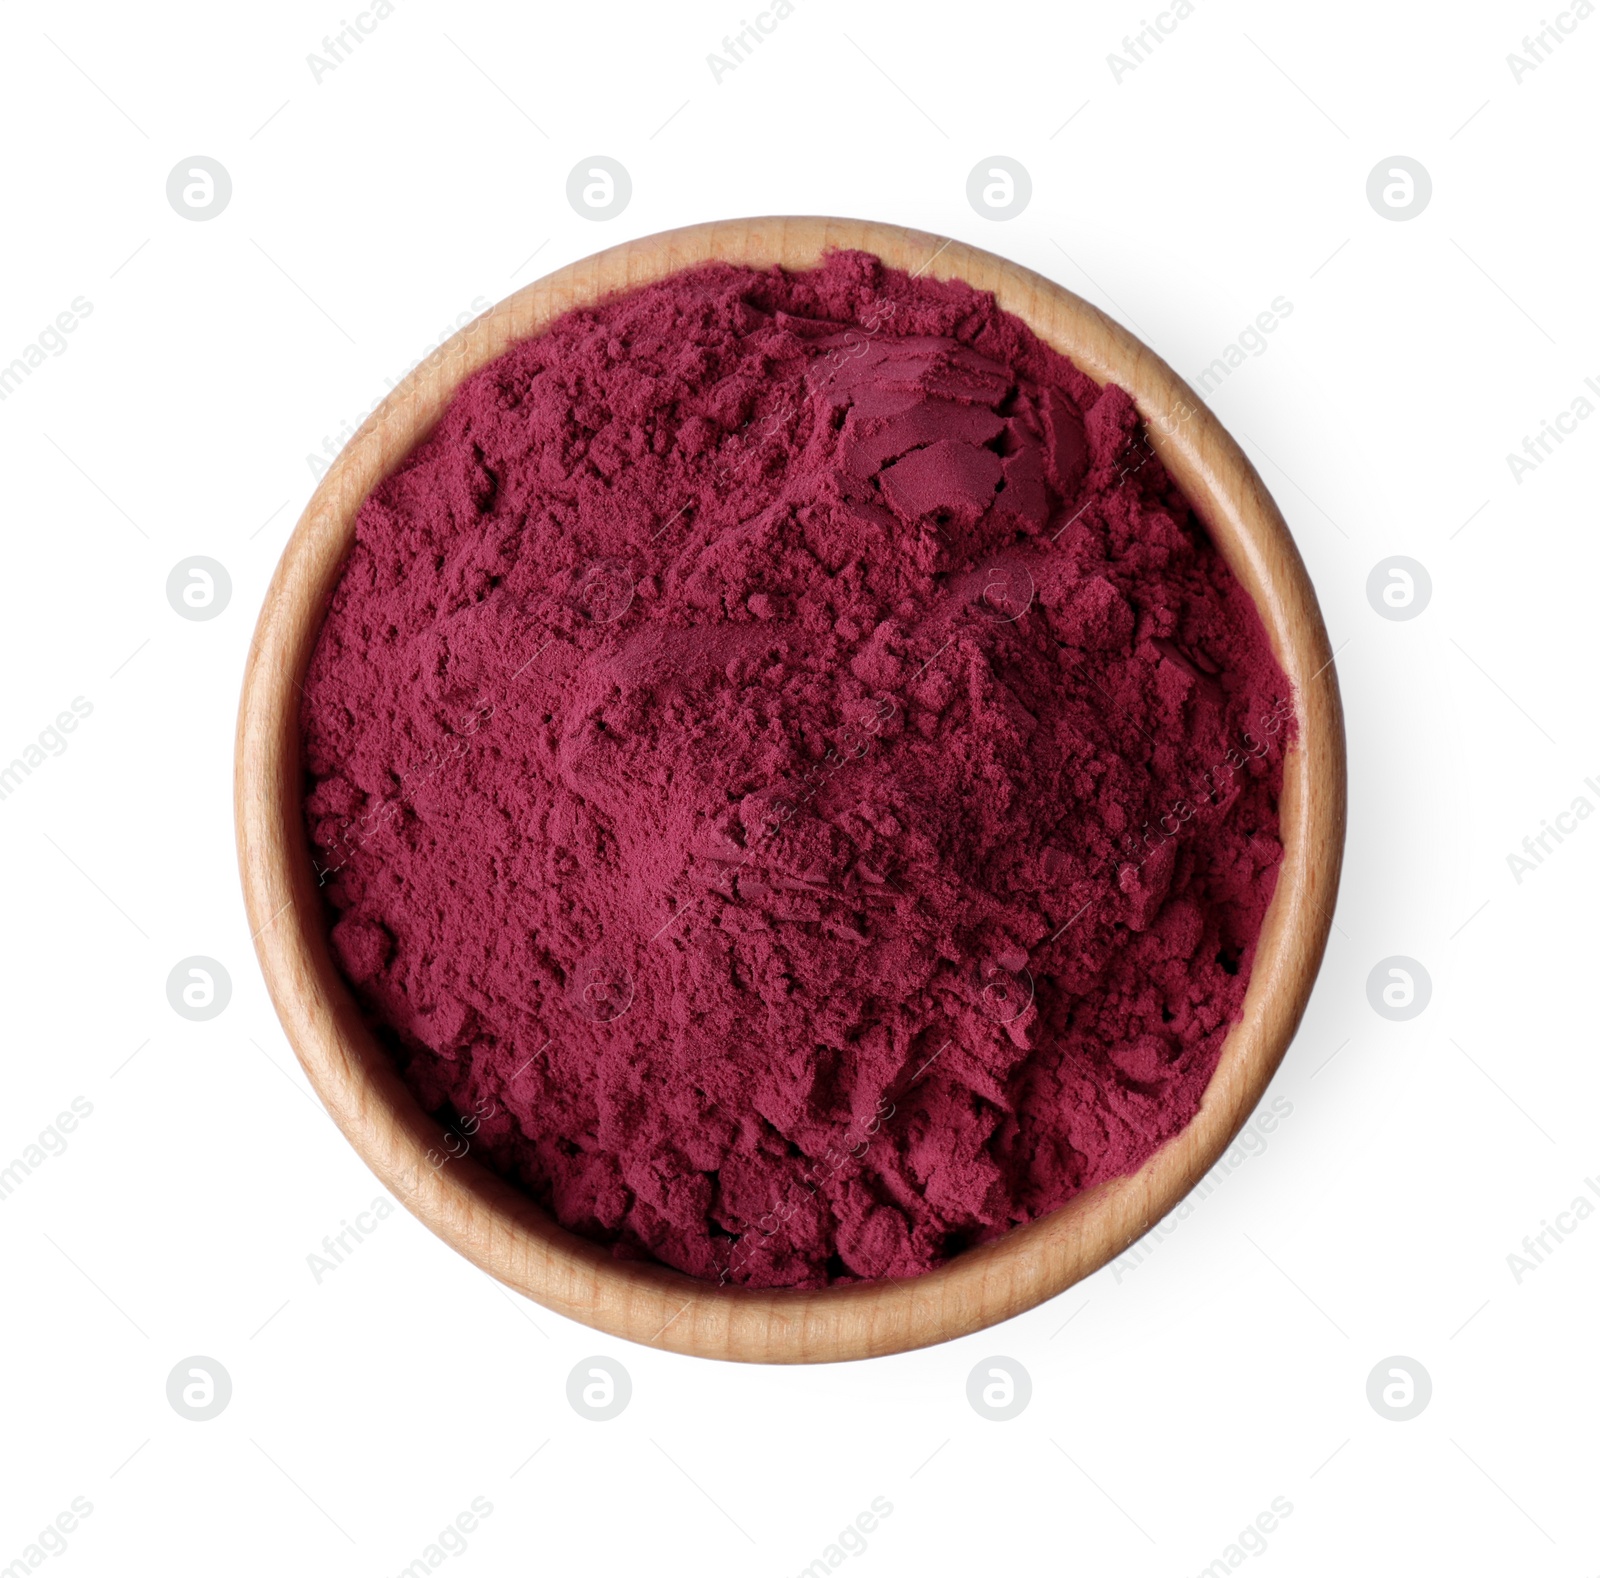 Photo of Wooden bowl of acai powder on white background, top view